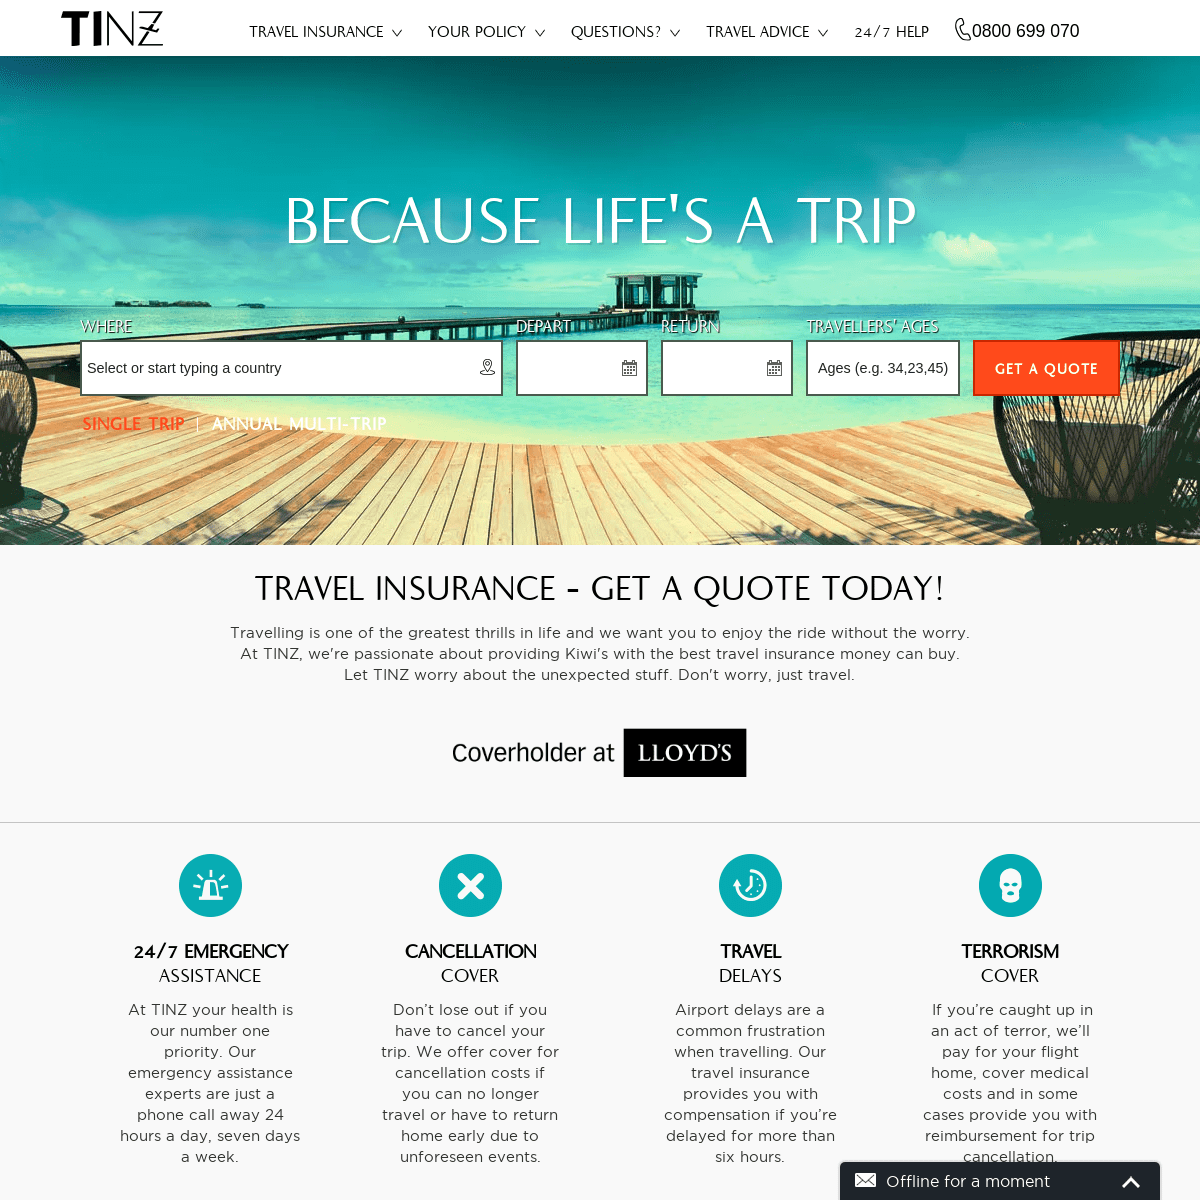 A complete backup of travelinsurance.co.nz